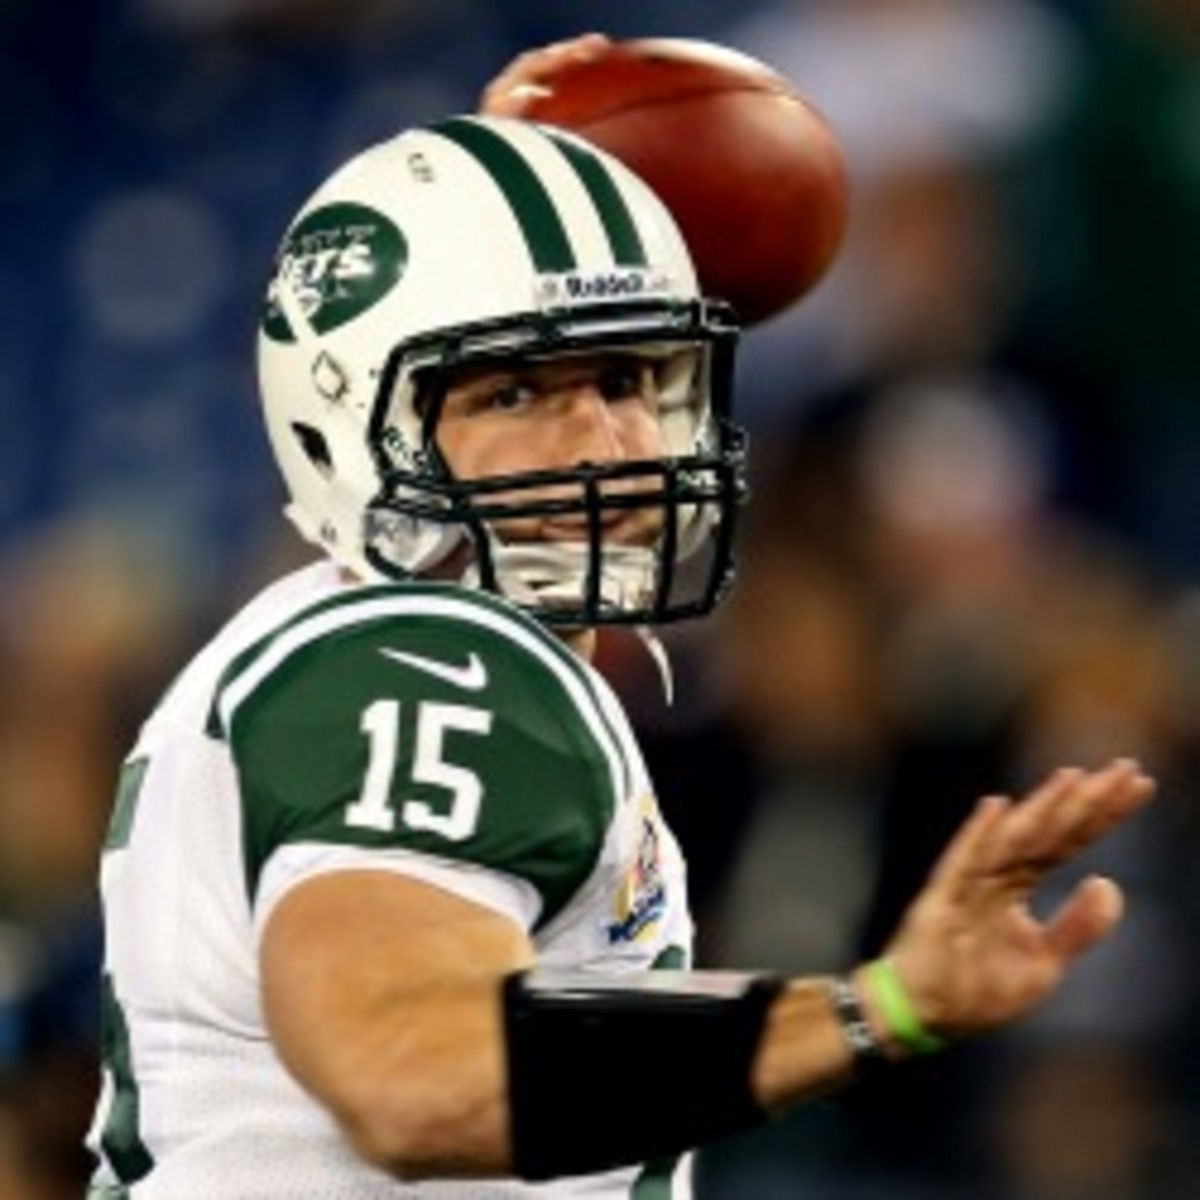 Owner Woody Johnson says Tebow was "forced" on him. (Andy Lyons/Getty Images)